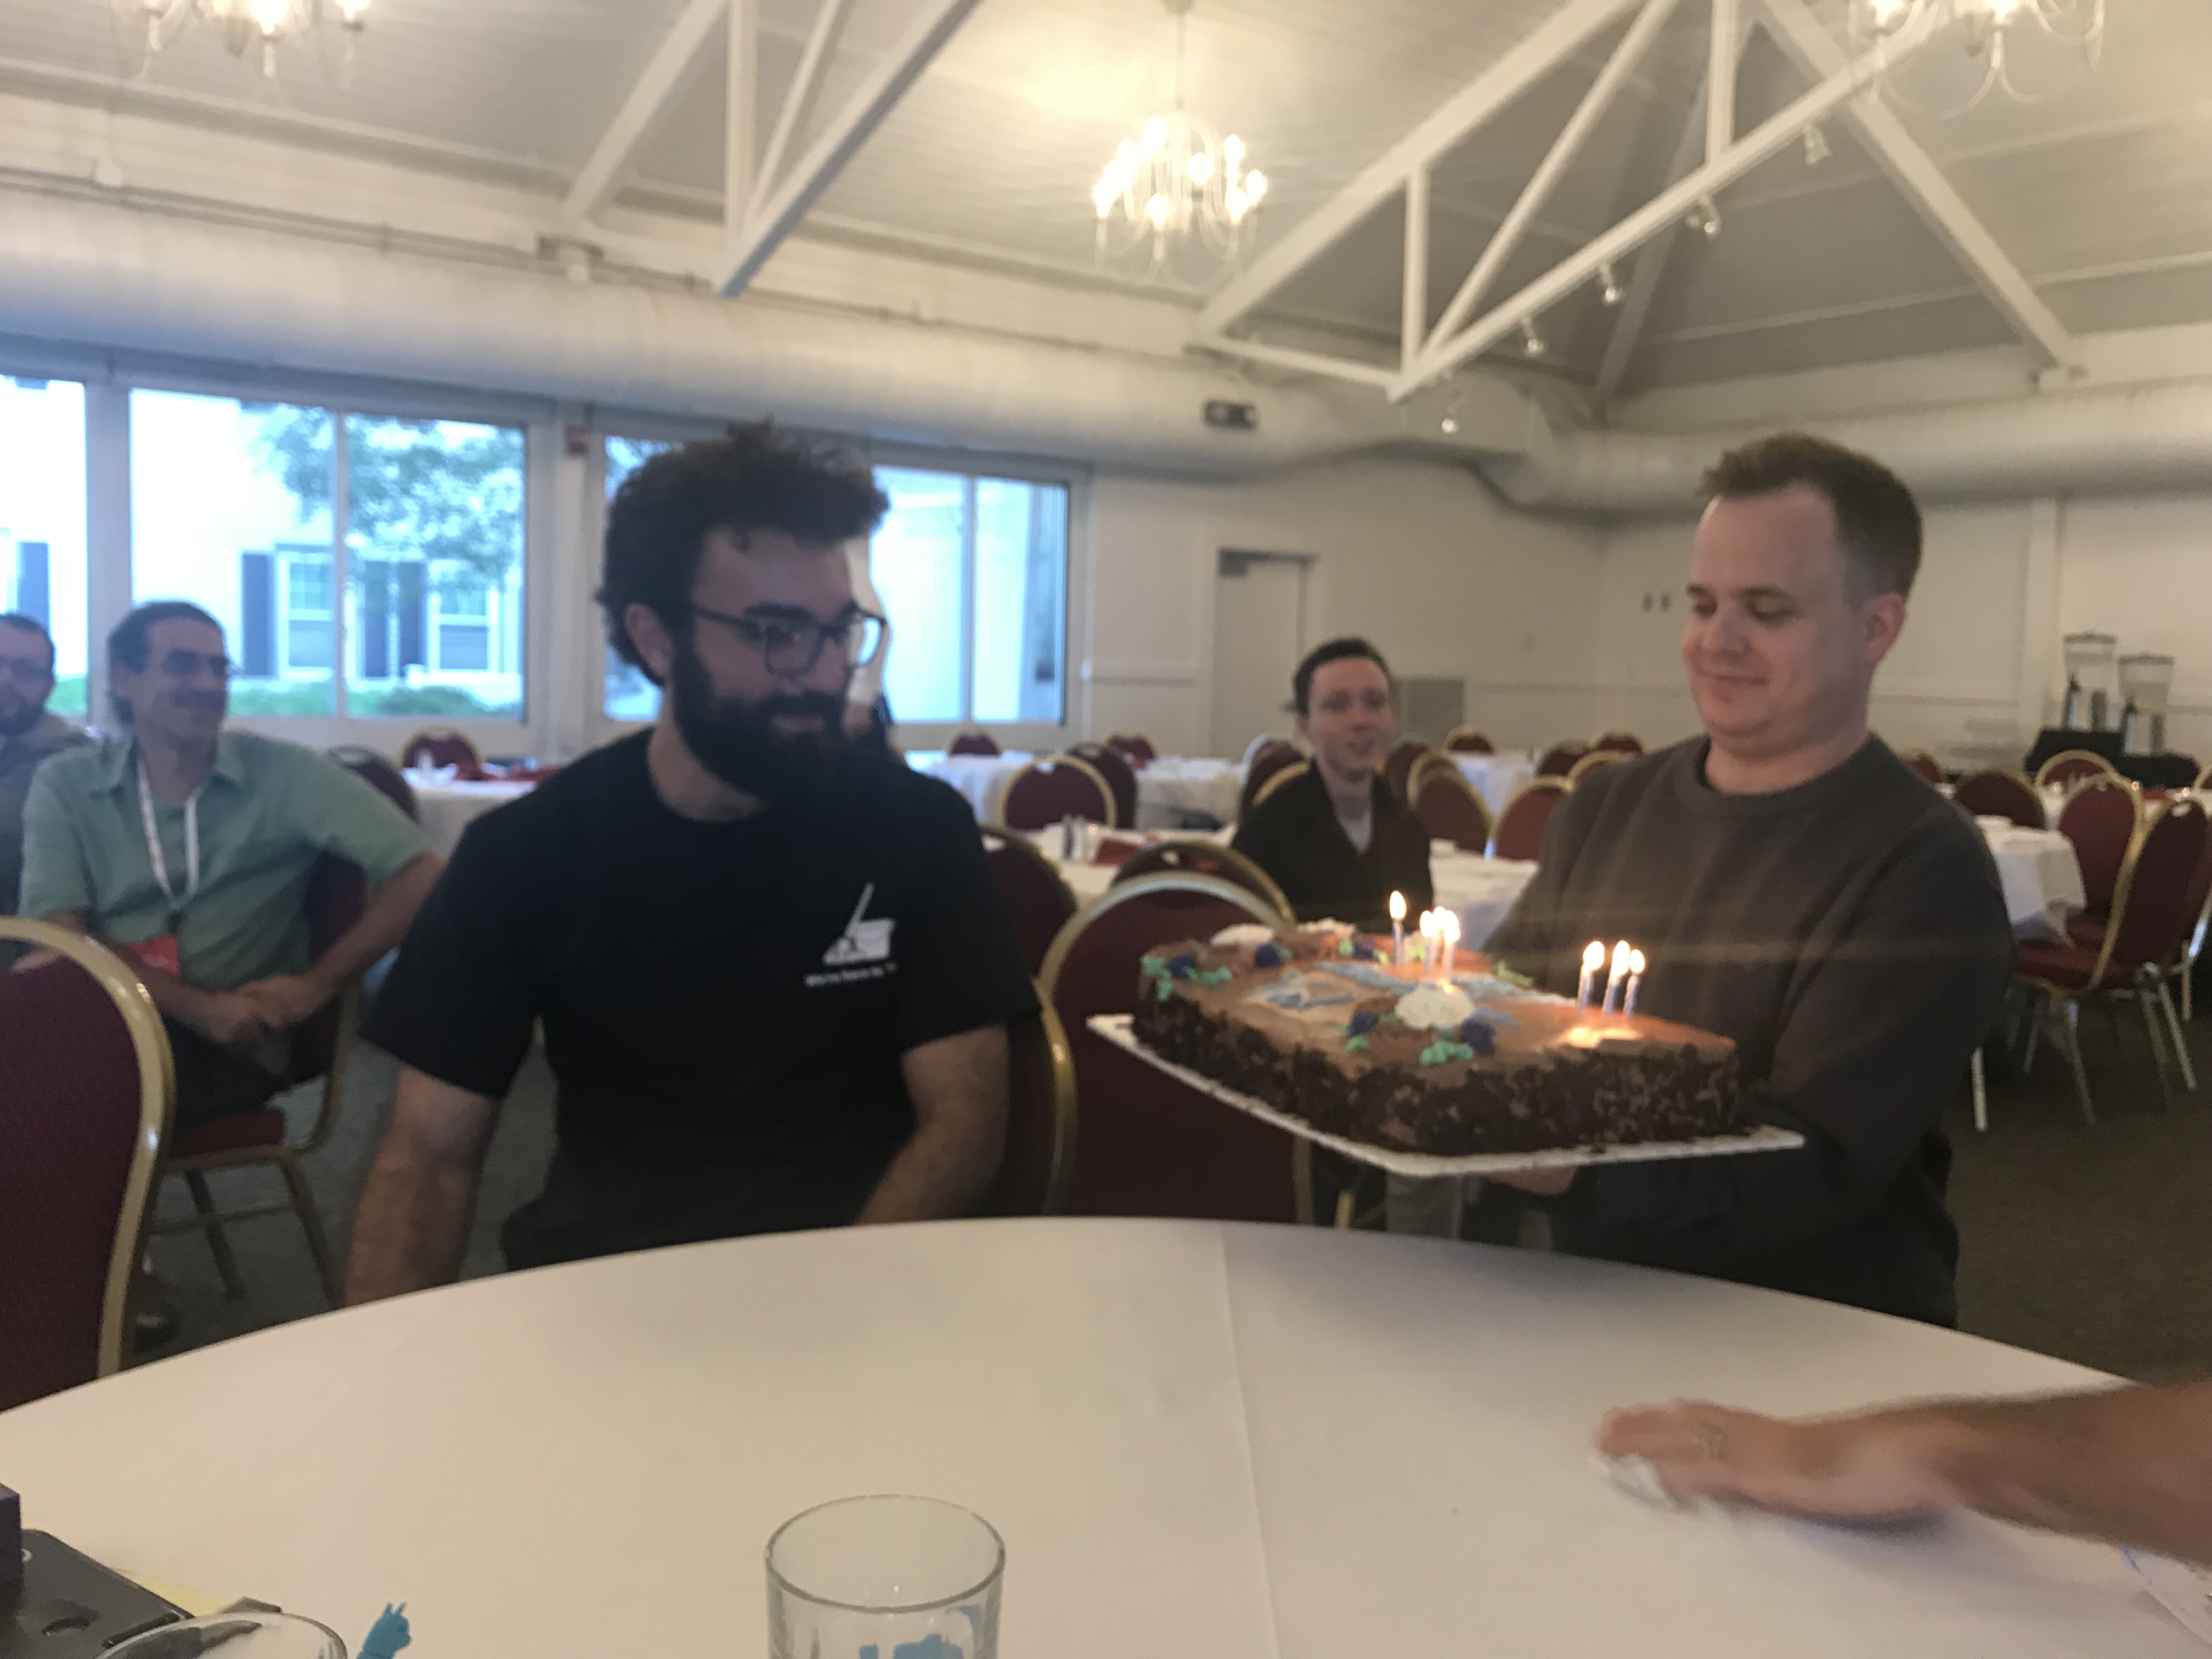 A White man holding a brown cake with lit candles in it and presenting it to a White bearded man with glasses